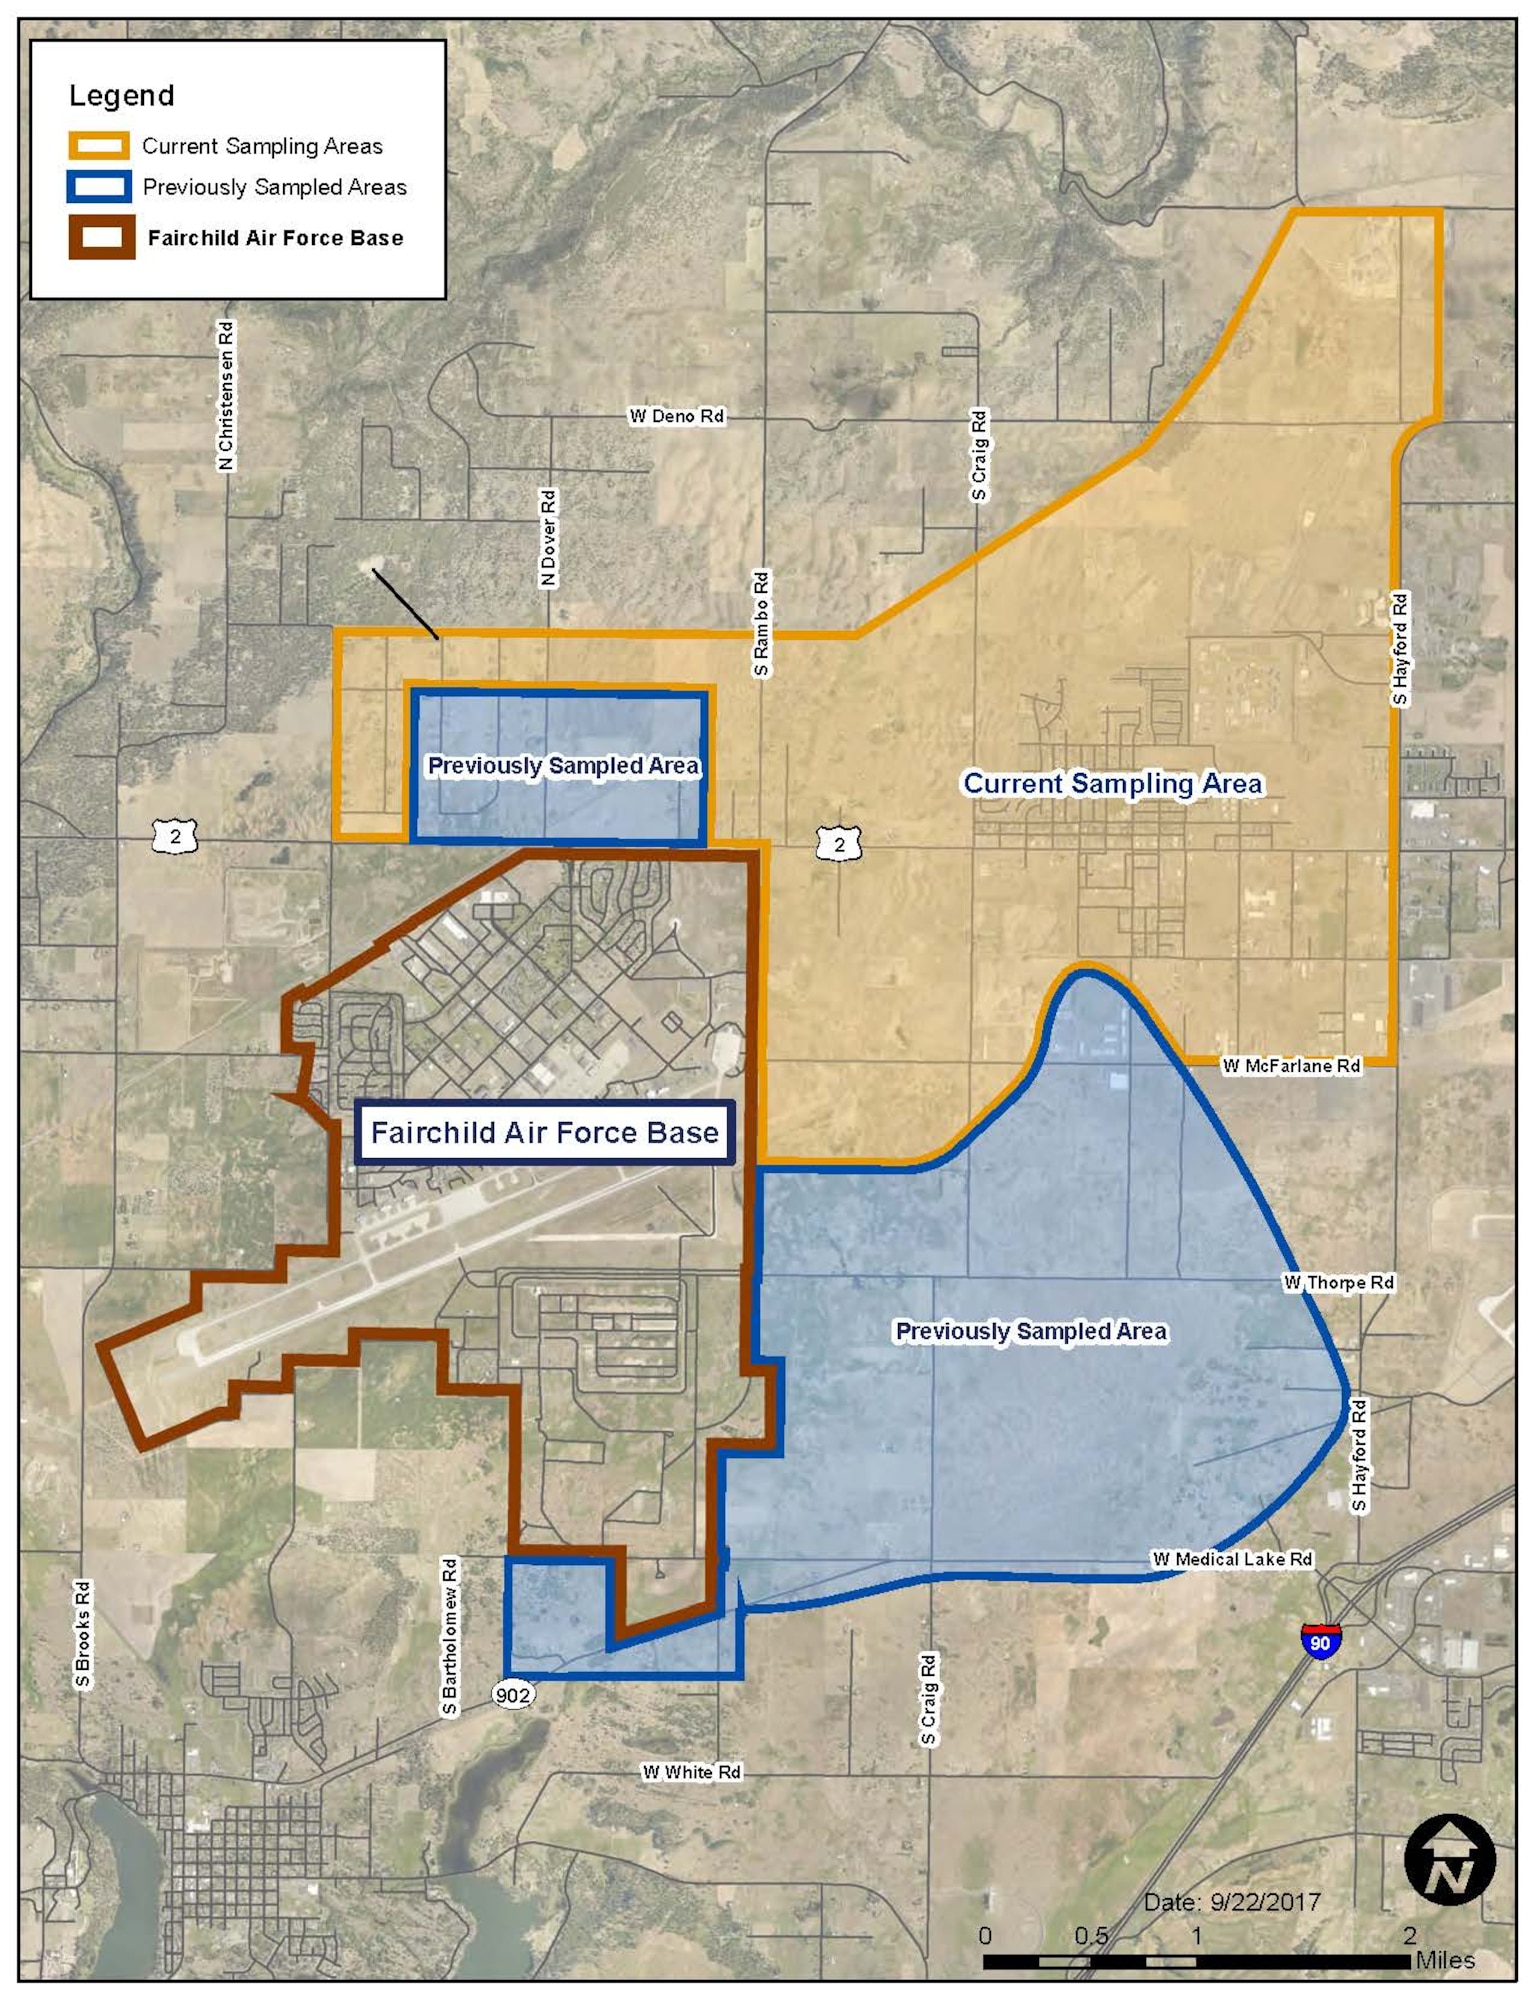 AFCEC released a map of past and current testing areas. Residents in the current sampling areas who have not been contacted for water sampling are asked to call the 92nd Air Refueling Wing Public Affairs Office at 509-247-5705 or 92arw.pa@us.af.mil.